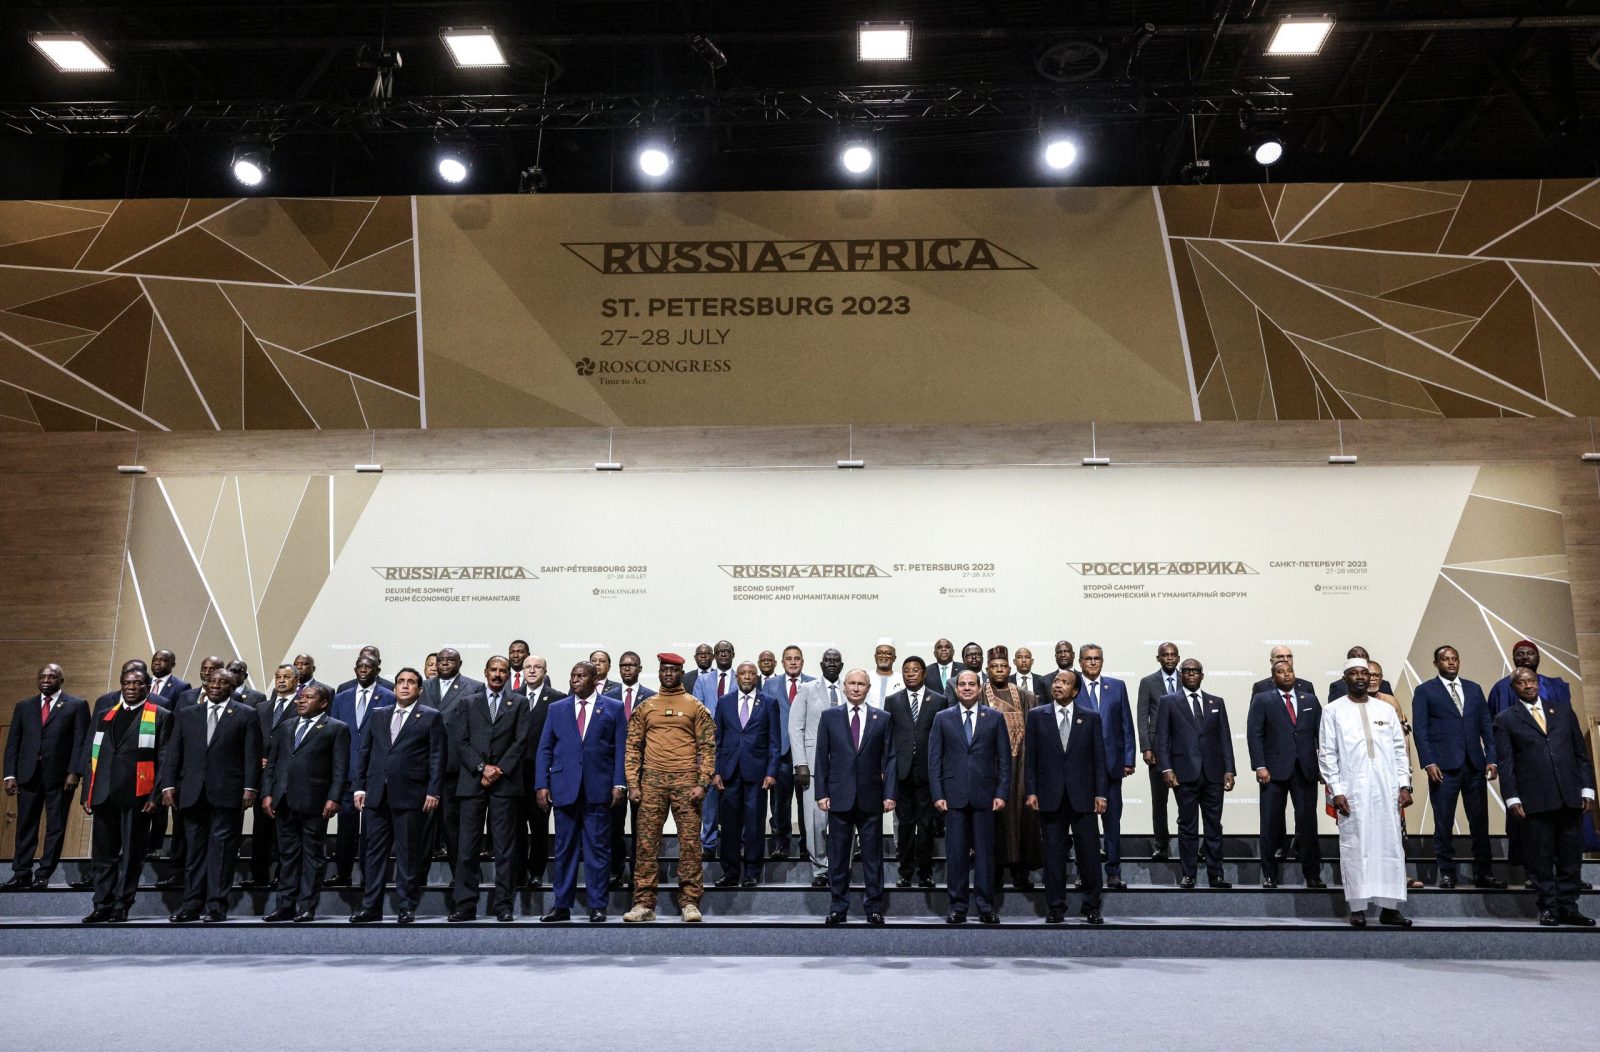 epa10772870 A handout photo made available by TASS Host Photo Agency shows Russian President Vladimir Putin (C) and Egyptian President Abdel Fattah el-Sisi (C-R) posing for a family photo with heads of delegations and participants of the Second Summit 'Russia-Africa' Economic and Humanitarian Forum in St.Petersburg, Russia, 28 July 2023. The Second Summit Economic and Humanitarian Forum 'Russia-Africa' takes place from 27 July to 28 at the Expoforum congress-exhibition center in St.Petersburg.  EPA/SERGEI BOBYLEV / TASS HOST PHOTO AGENCY/ HANDOUT --MANDATORY CREDIT-- HANDOUT EDITORIAL USE ONLY/NO SALES